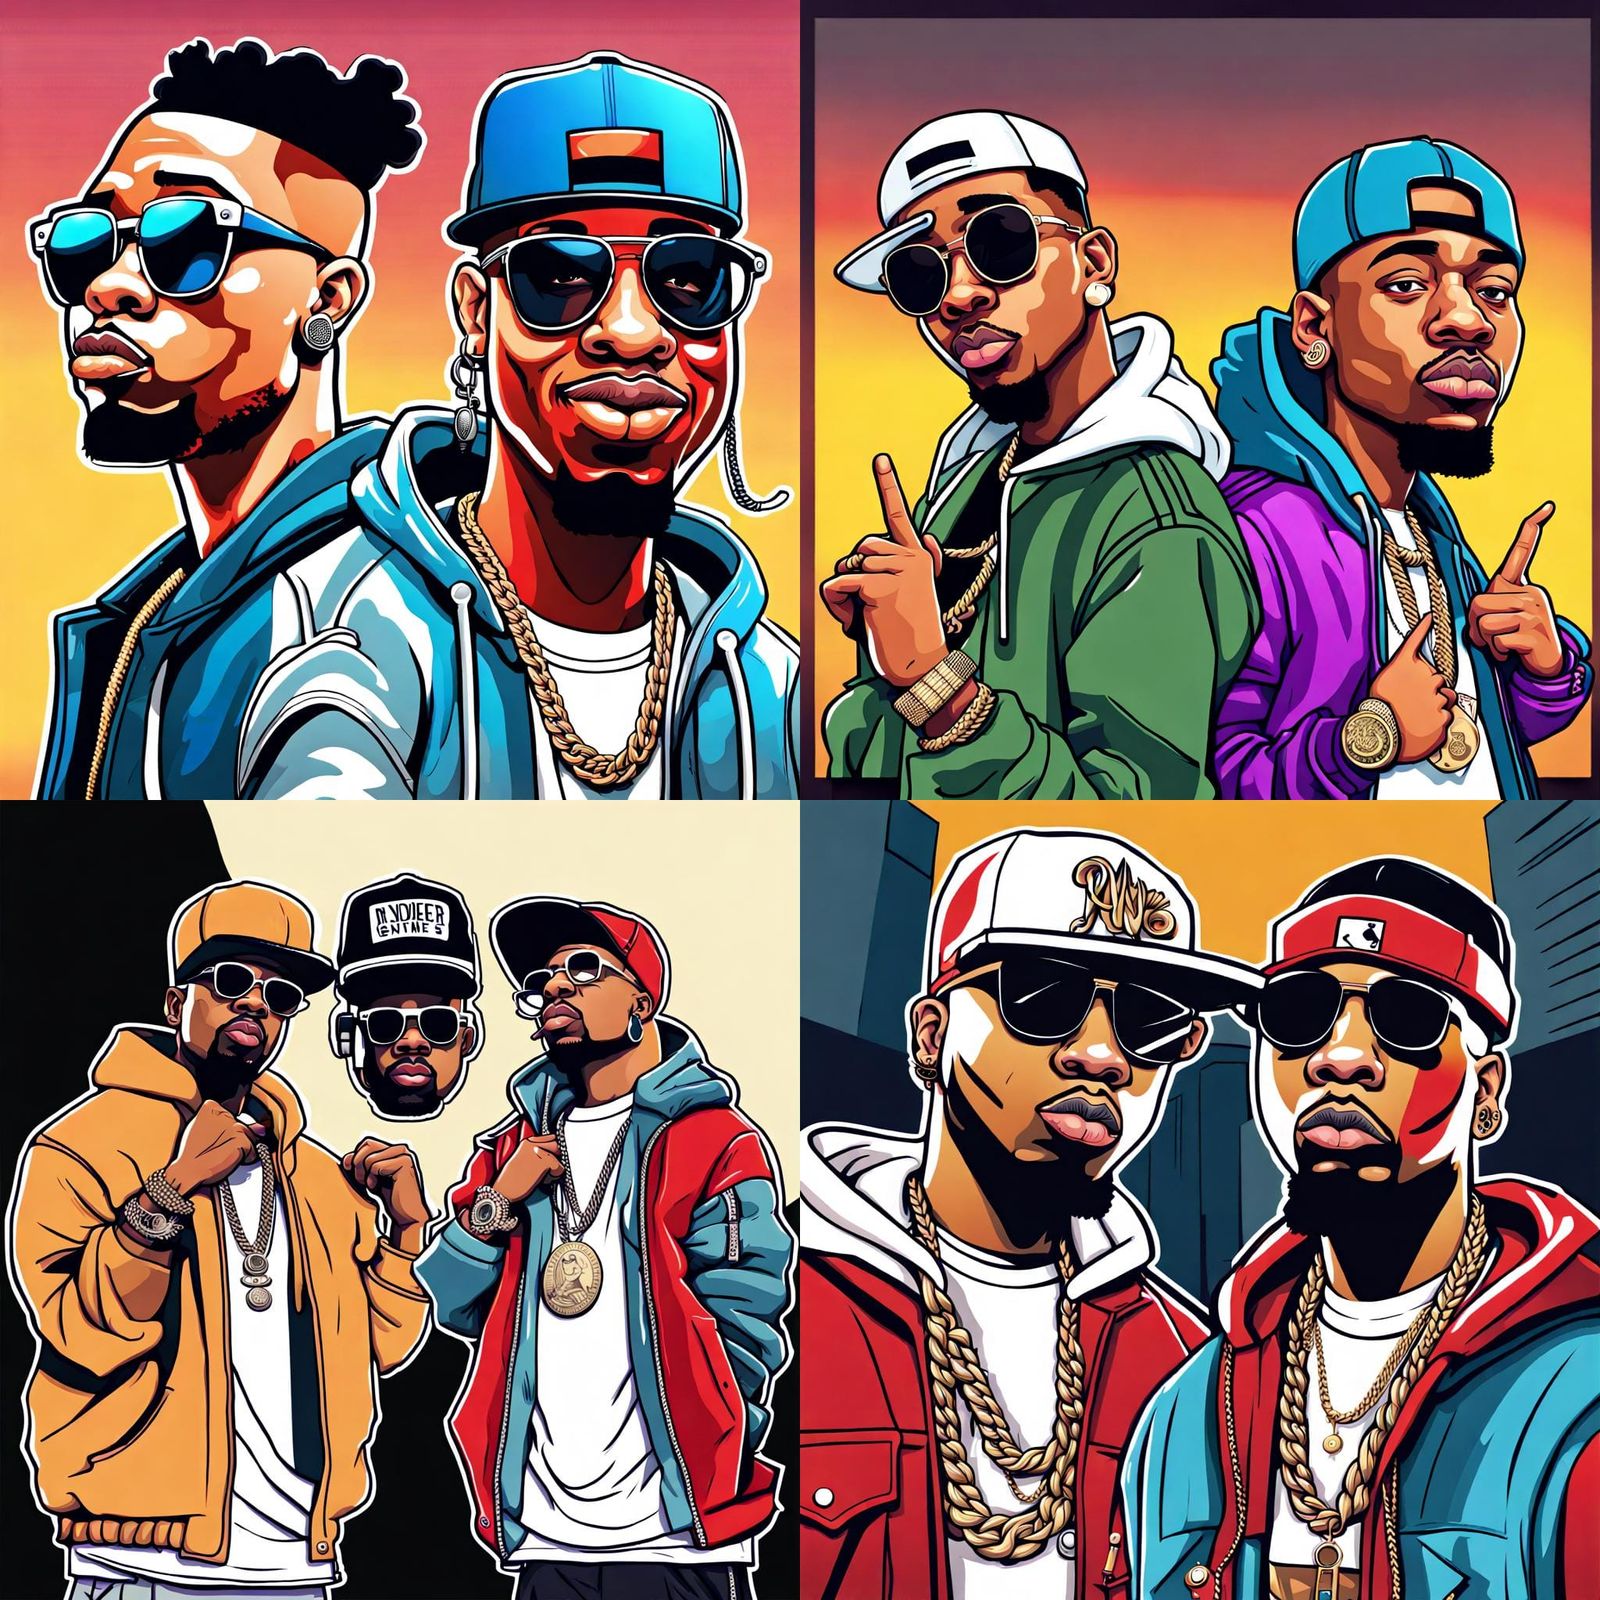 create cartoon art of two rappers back to back - AI Generated Artwork ...